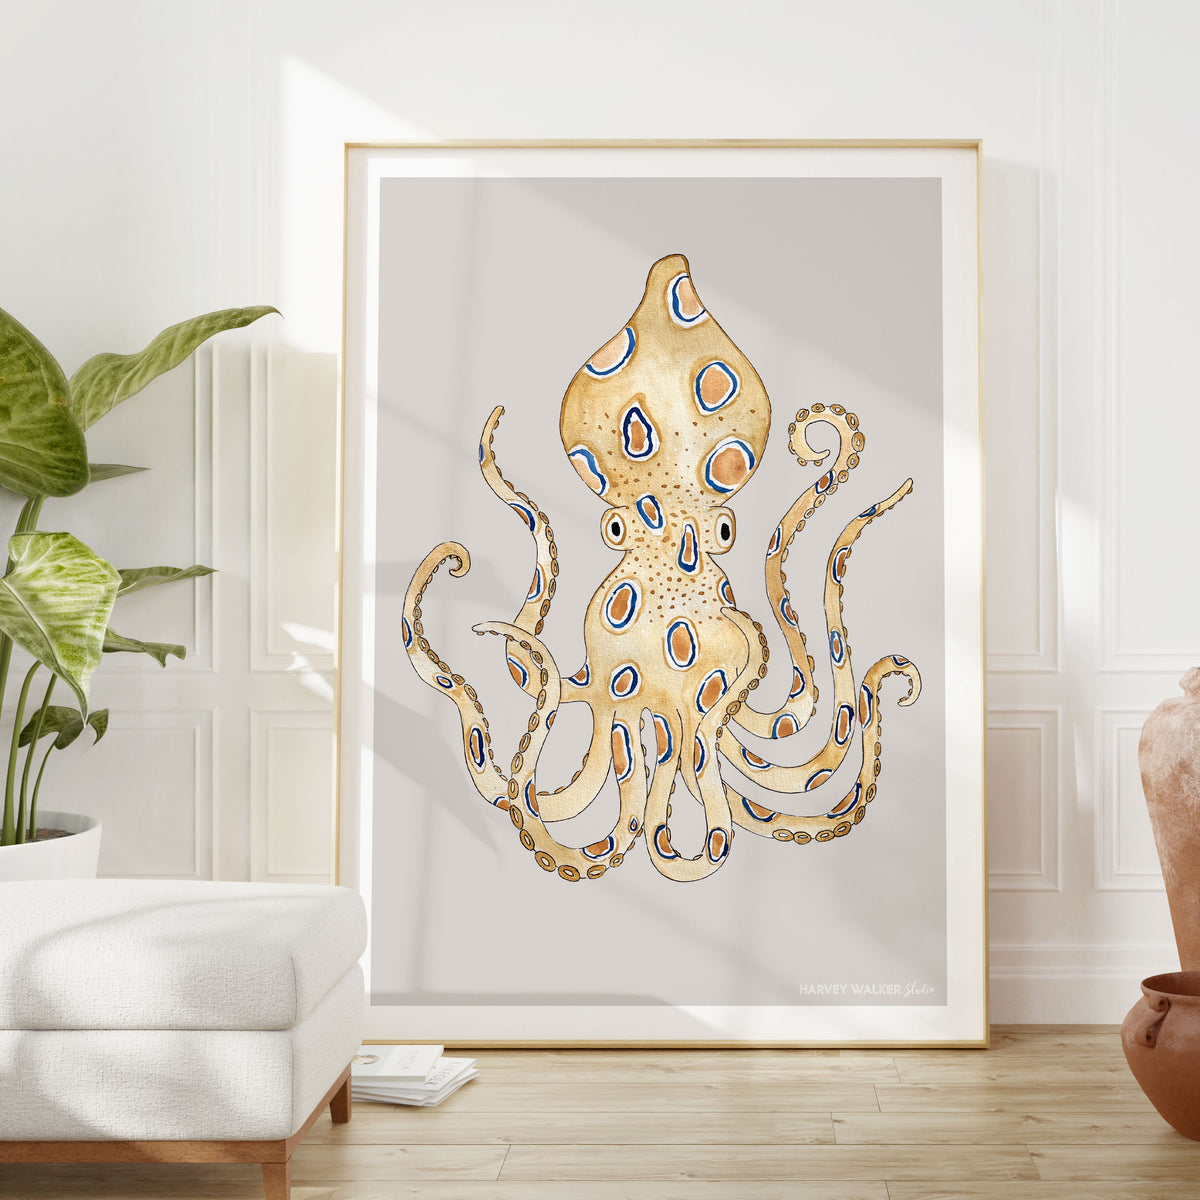 Large format blue ring octopus illustration in A1 shown here in a modern mid century living room. Bring a fun coastal vibe to your space with this hand illustrated print.